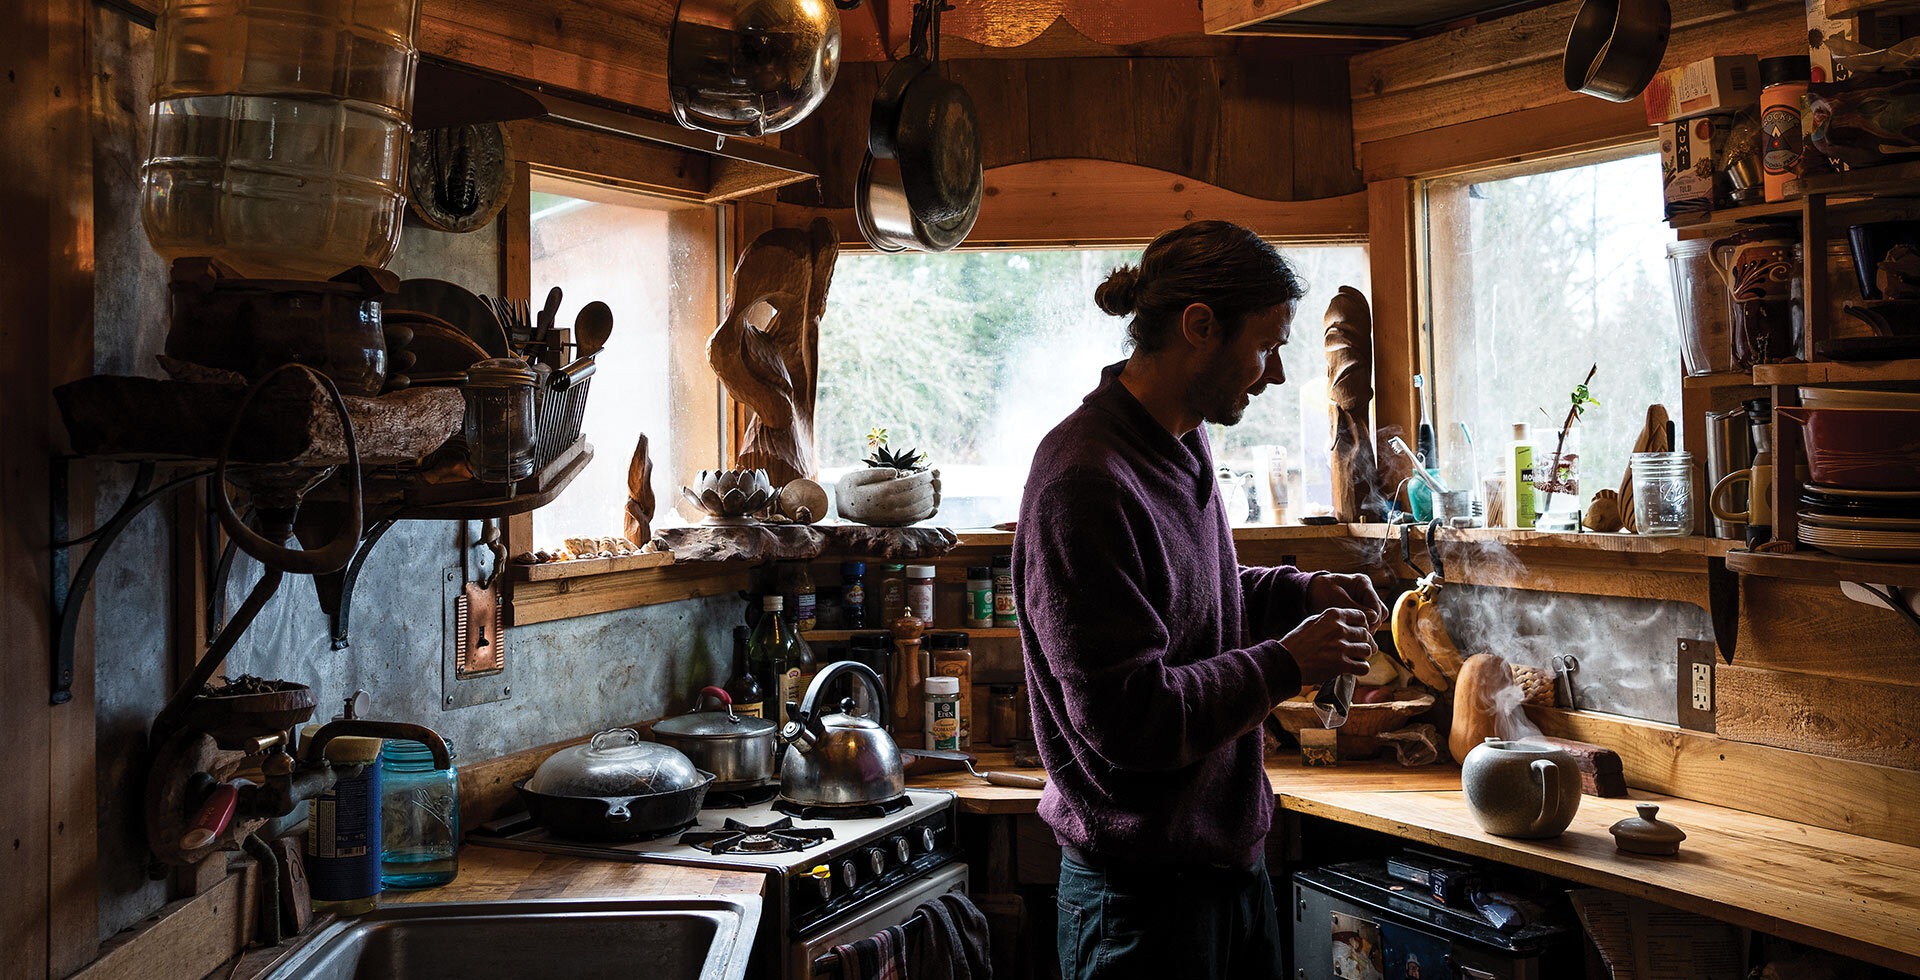 Travis brews a pot of tea in the kitchen of the Leafspring, a tiny house he calls home. Photo: Ian Terry